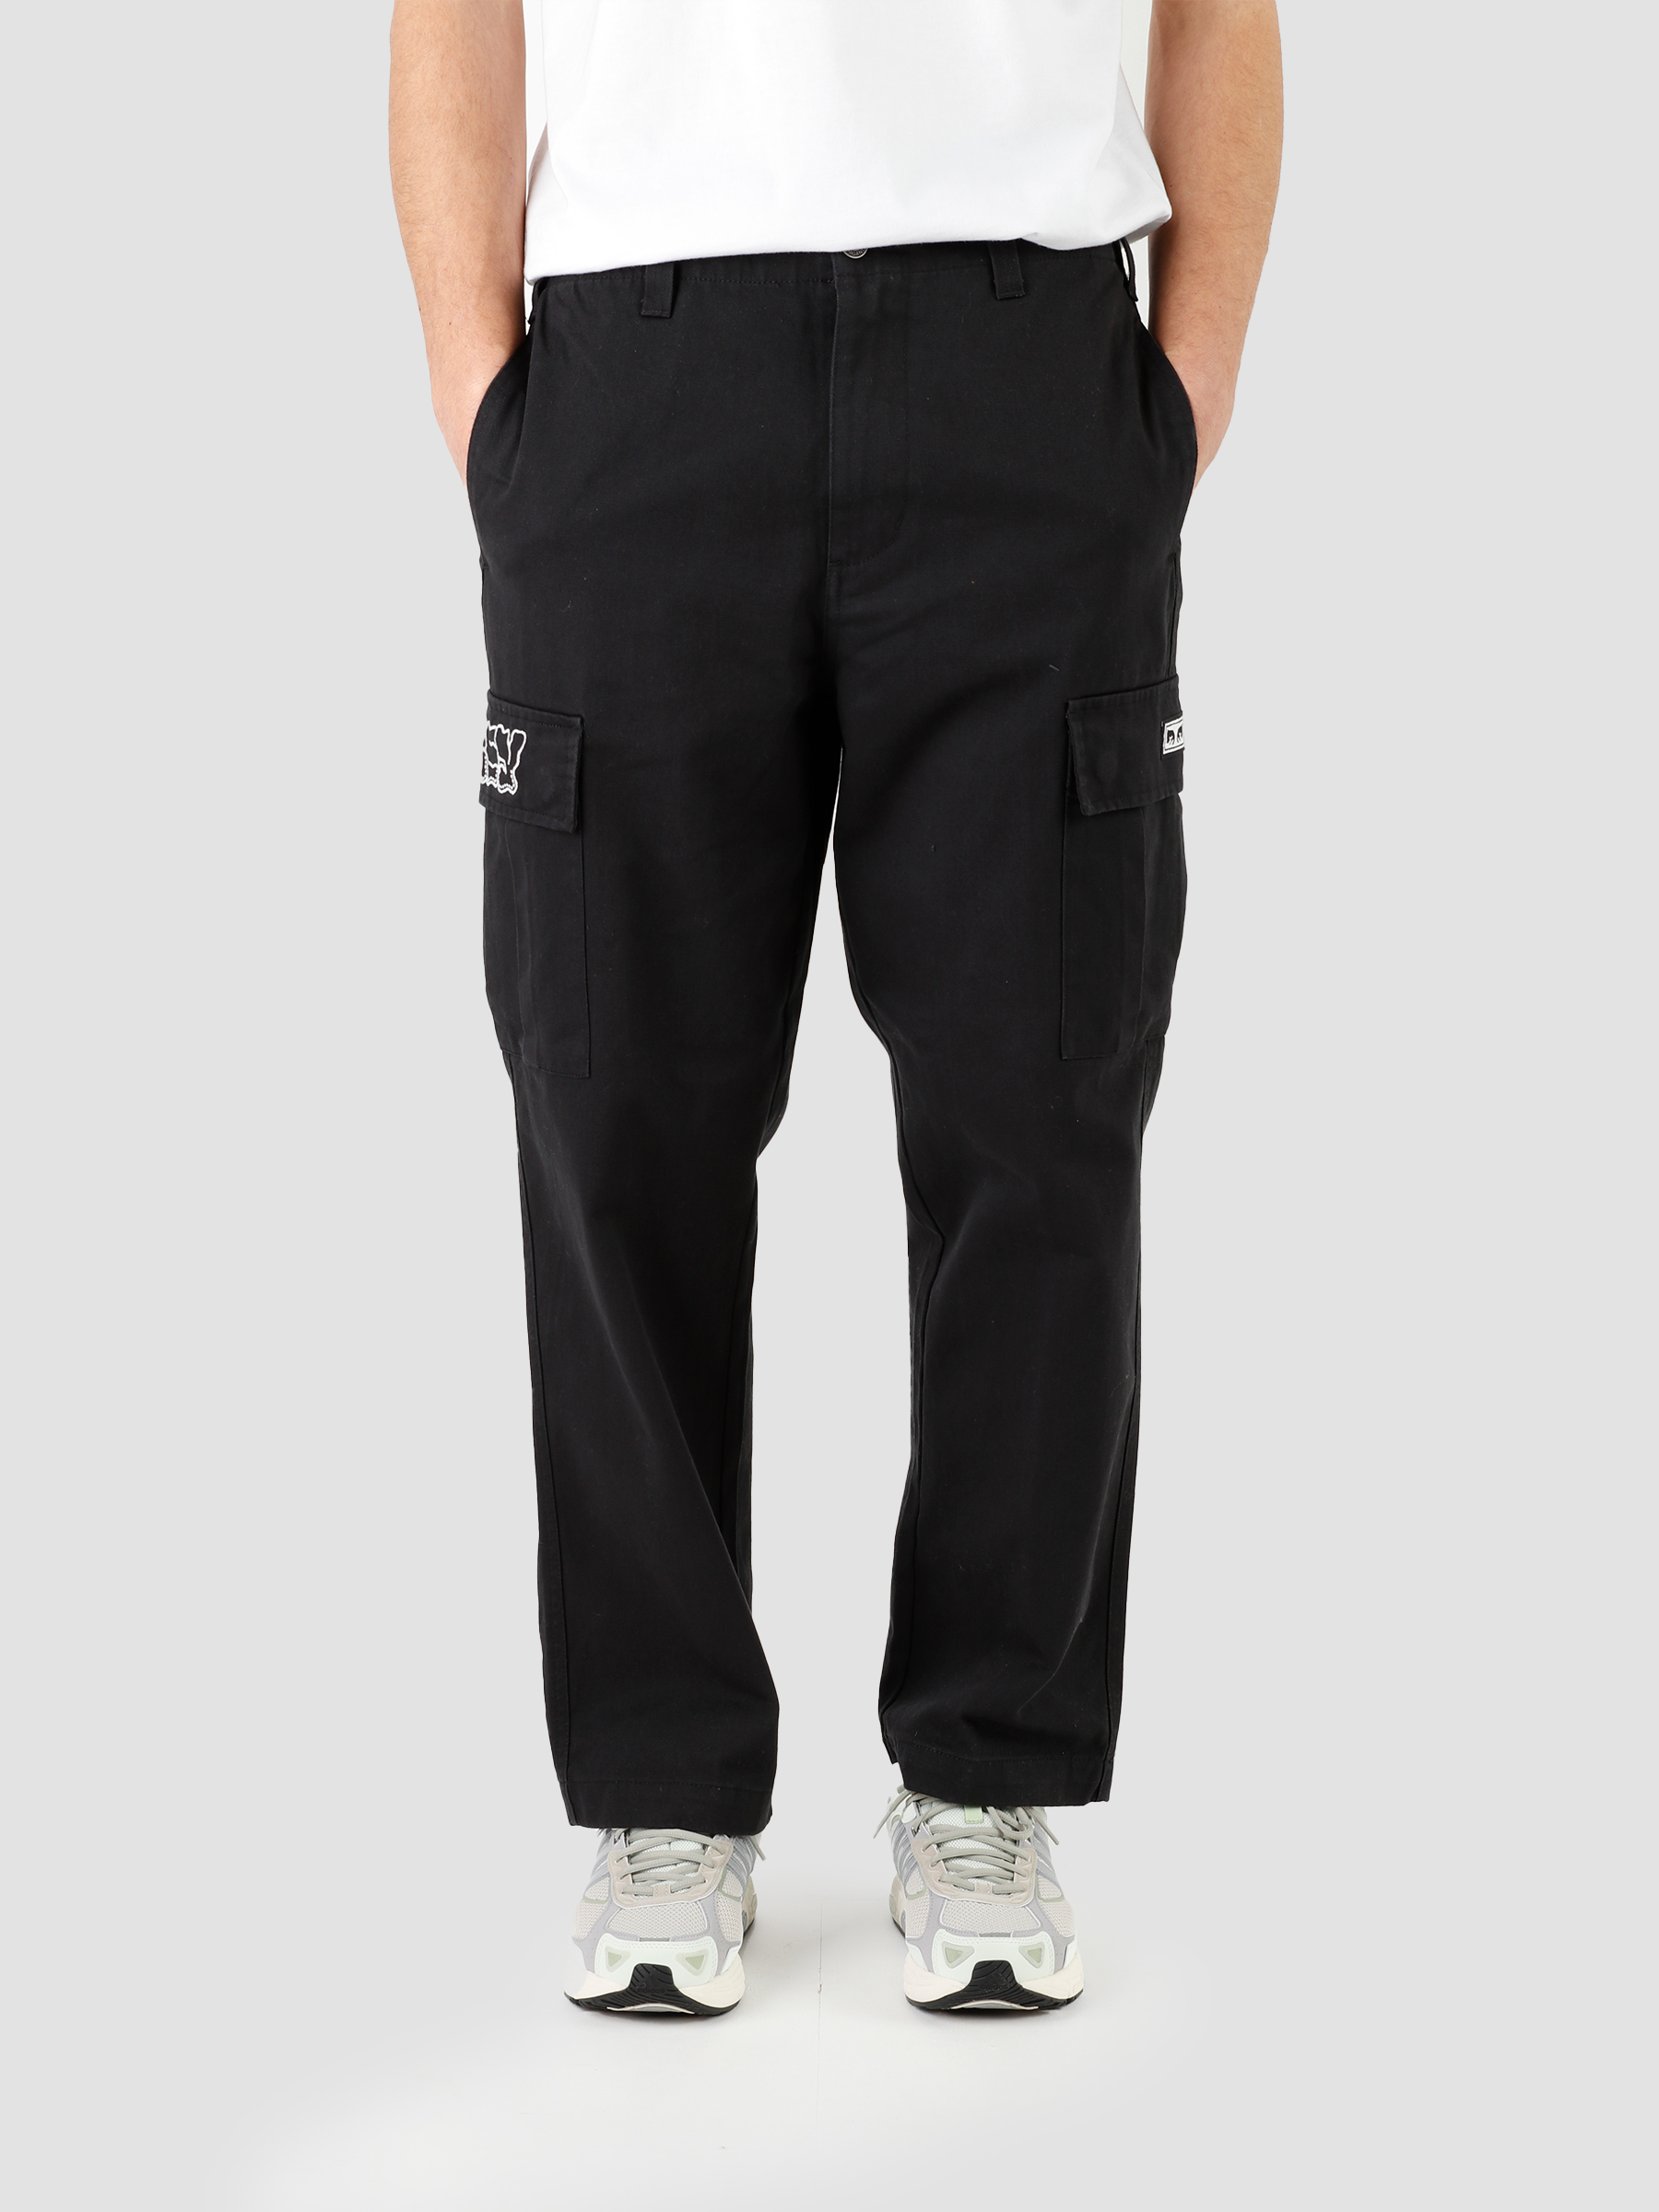 Big  Tall Wrangler RelaxedFit Twill Cargo Pants